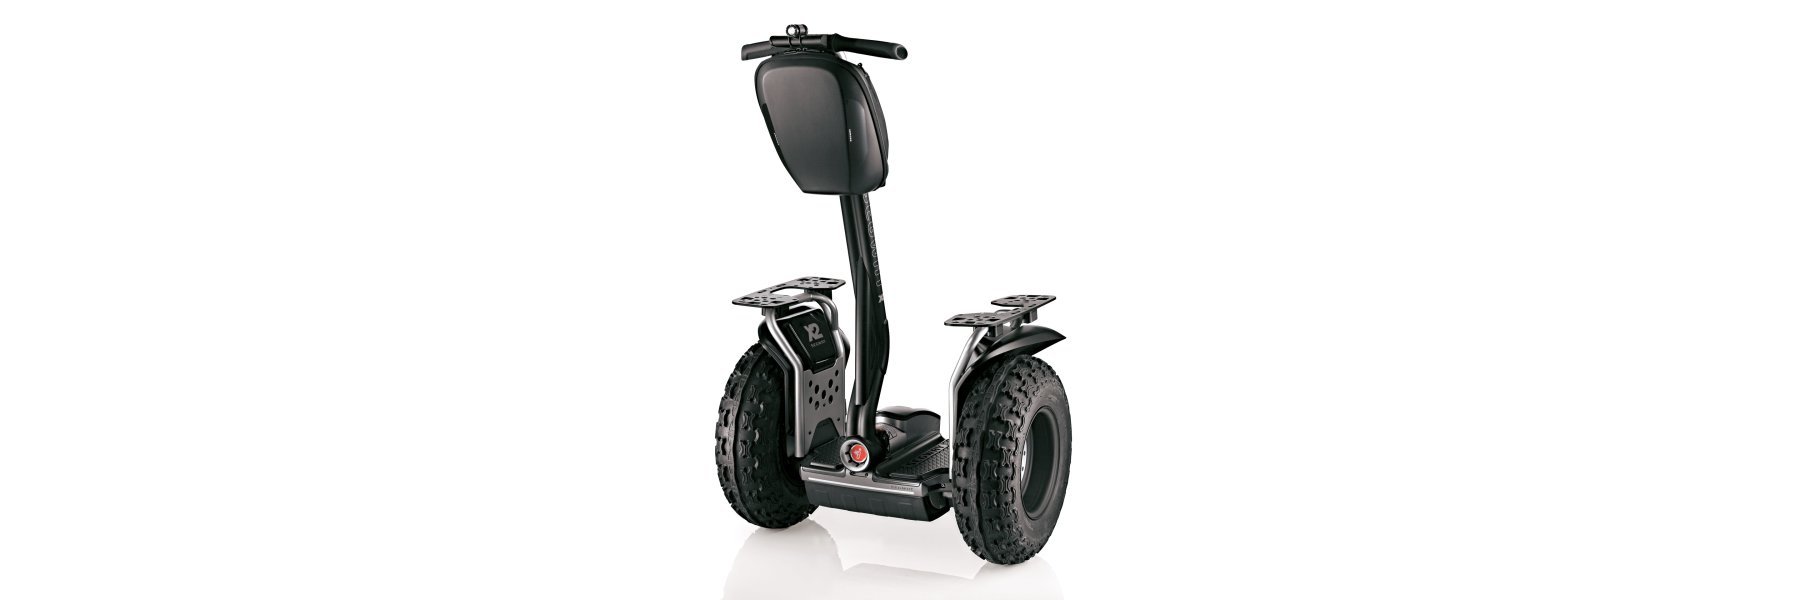 Segway PT - Scooter